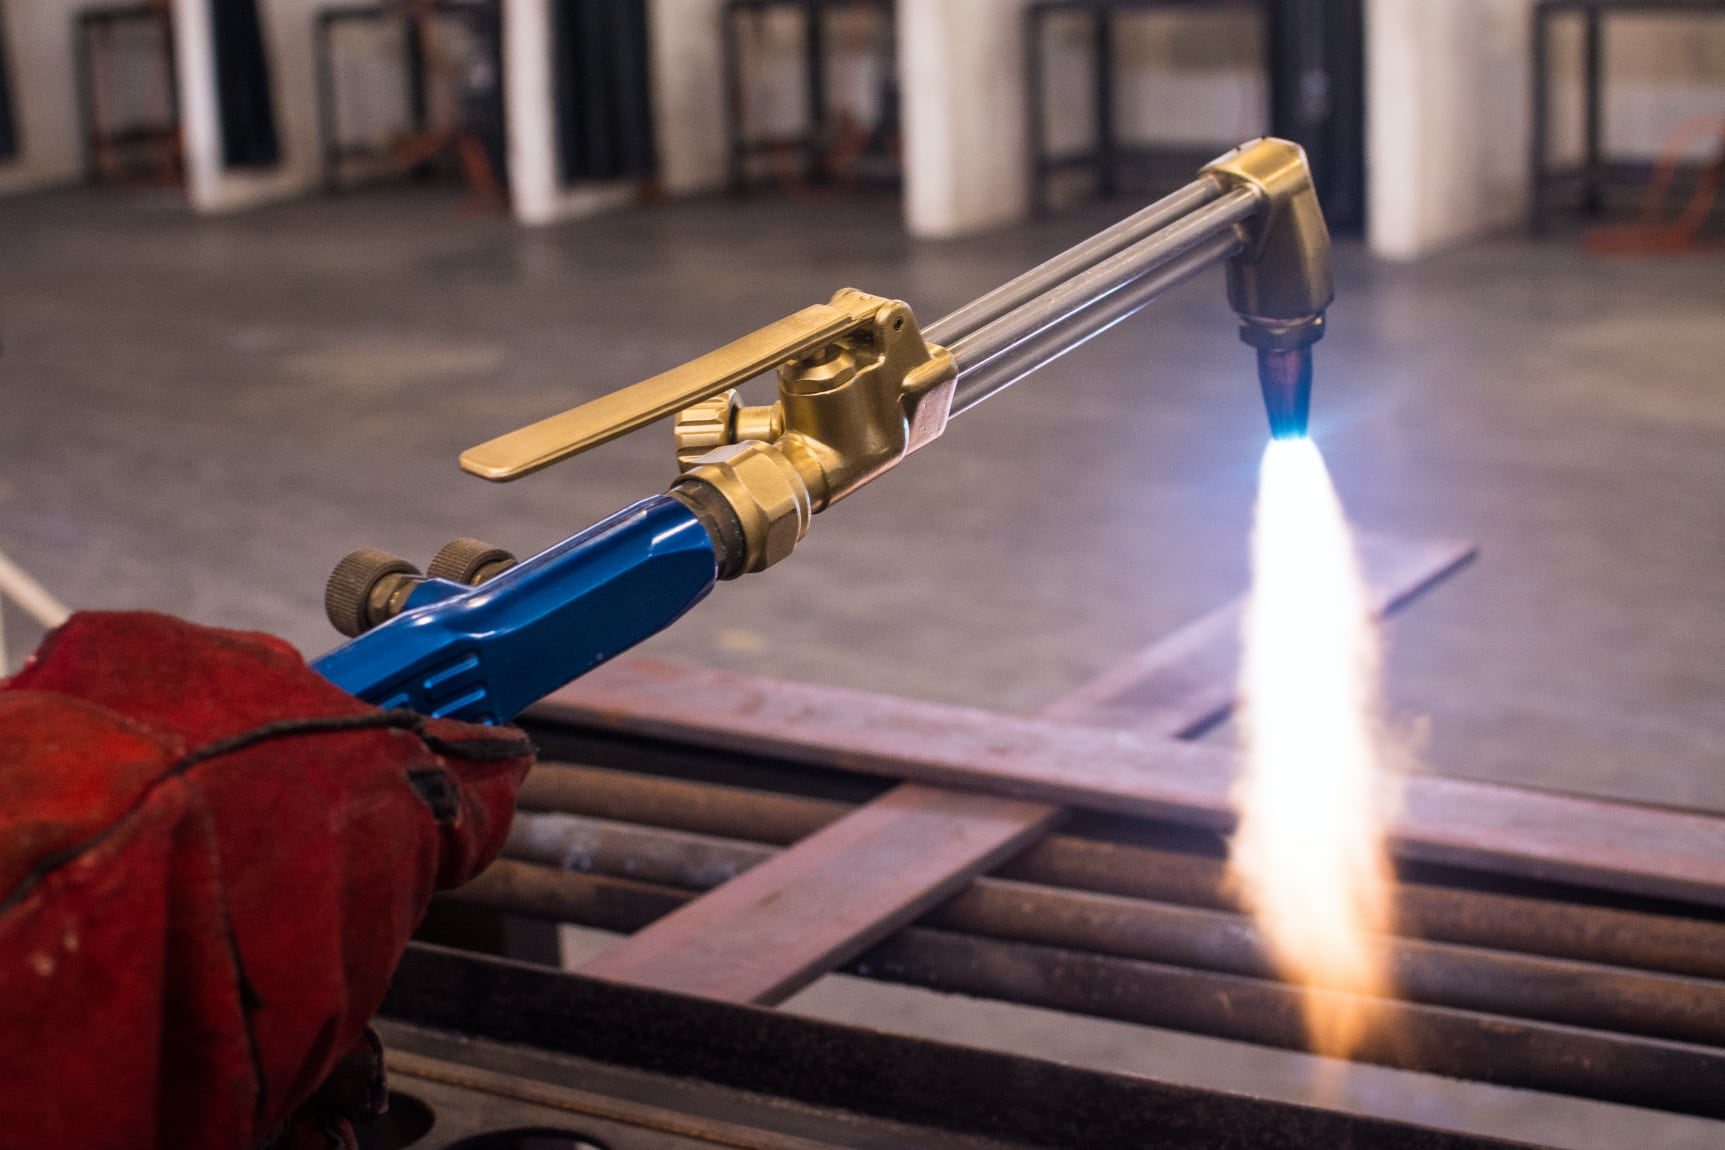 The Oxy-Acetylene Cutting Torch